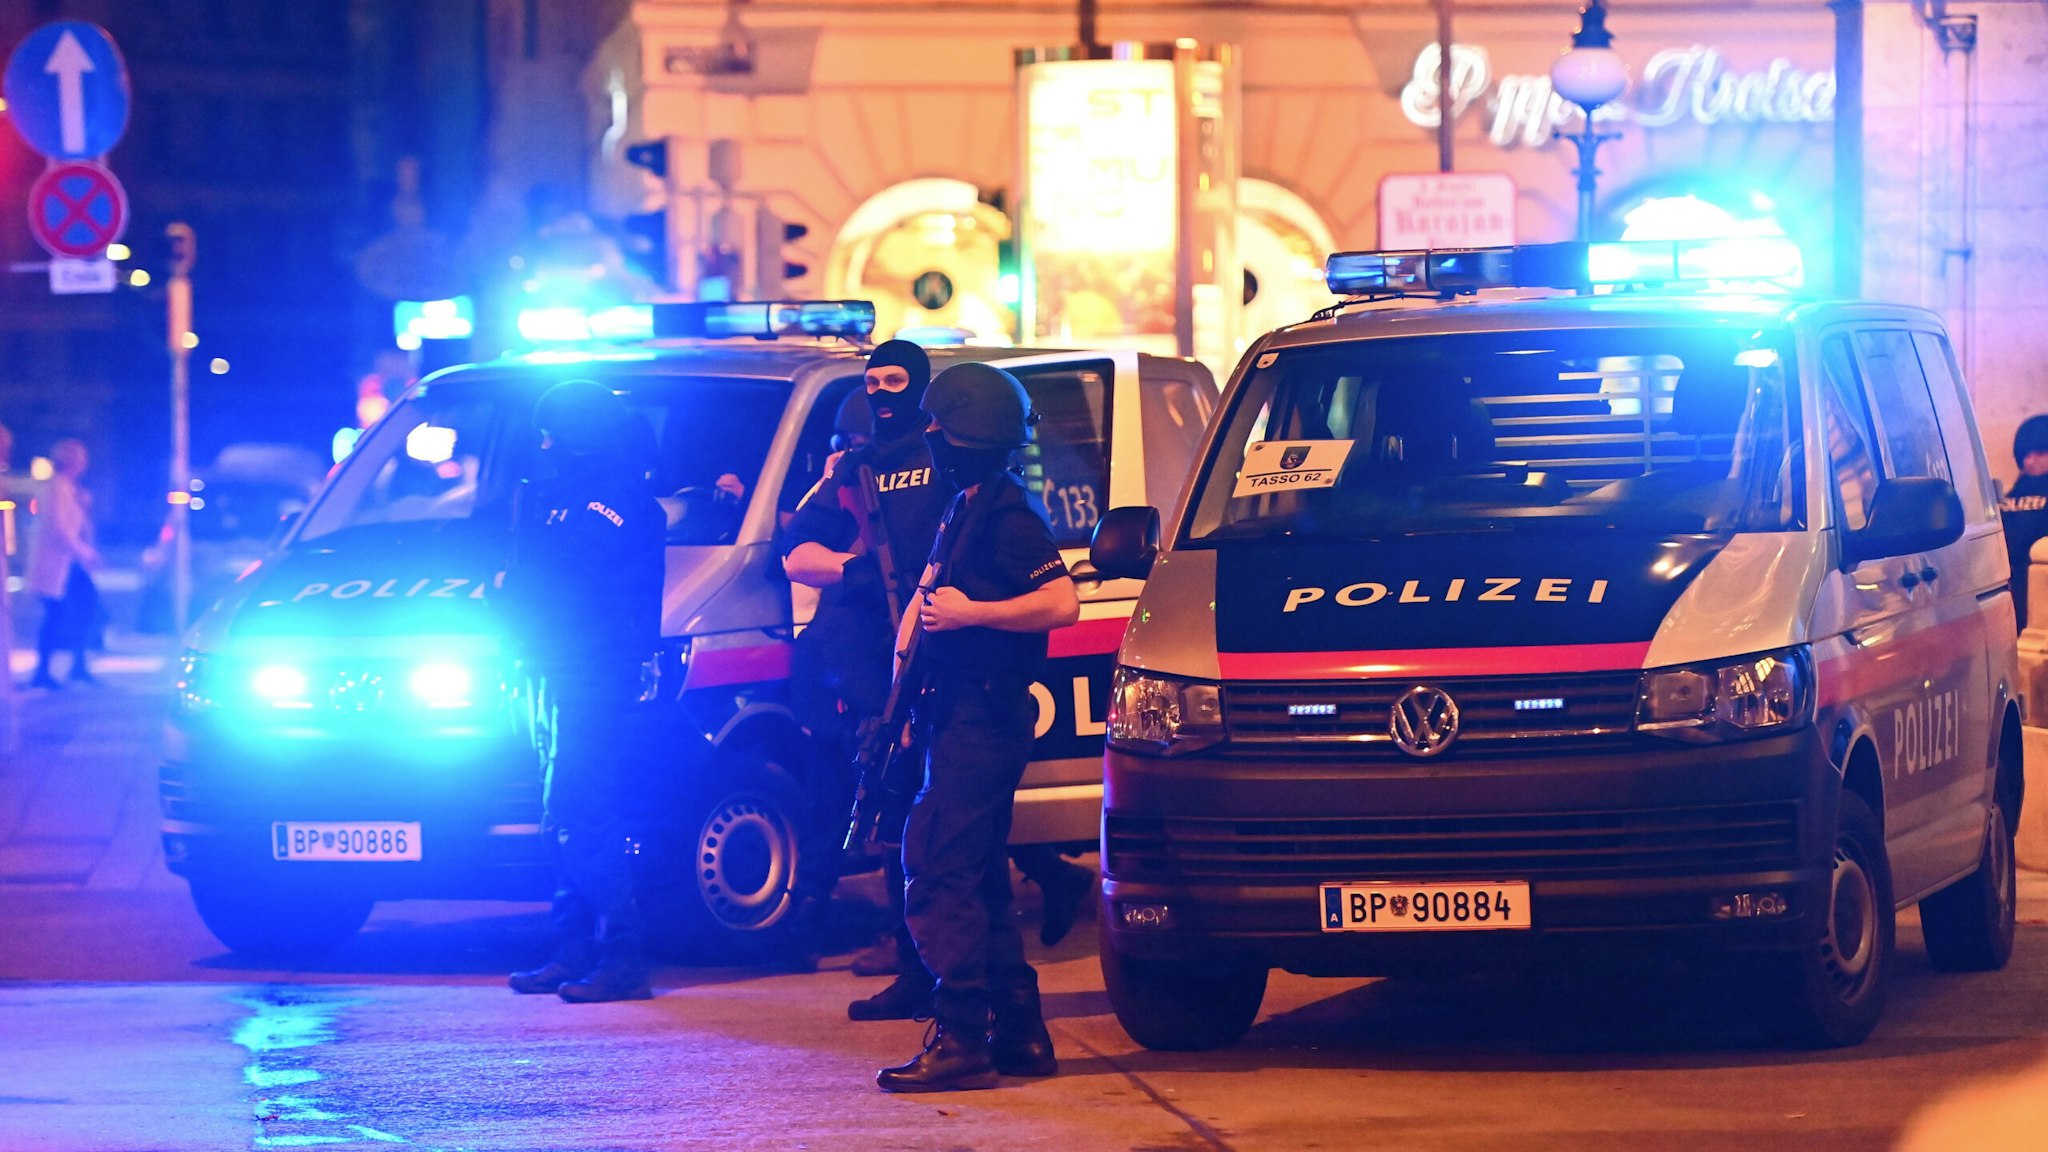 Police cars and policemen stand in the central Vienna on November 2, 2020, following a shooting near a synagogue. - Multiple gunshots were fired in central Vienna on the evening of November 2, 2020, according to police, with the location of the incident close to a major synagogue. Police urged residents to keep away from all public places or public transport. One attacker was "dead" and another "on the run", with one police officer being seriously injured, Austria's interior ministry said according to news agency APA.